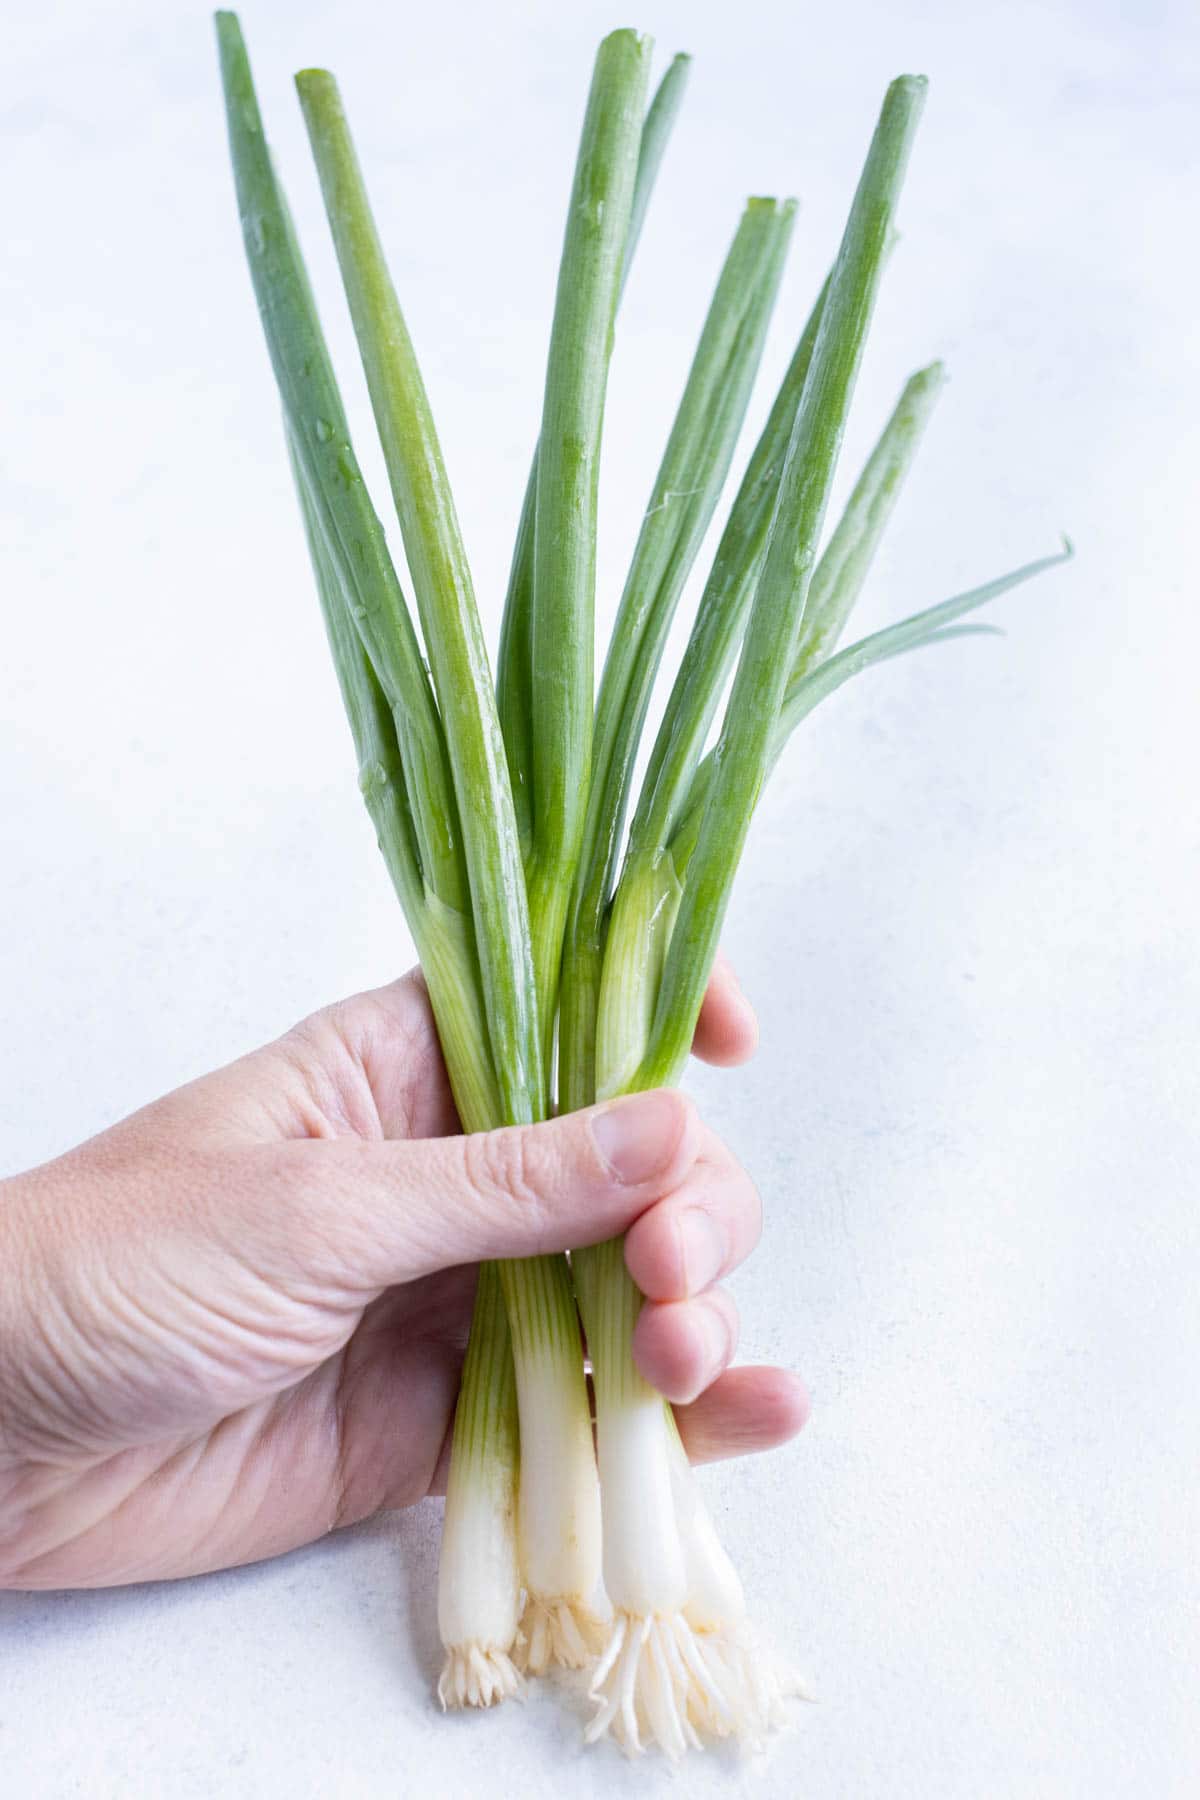 How to Cut Green Onions - The Quick Journey